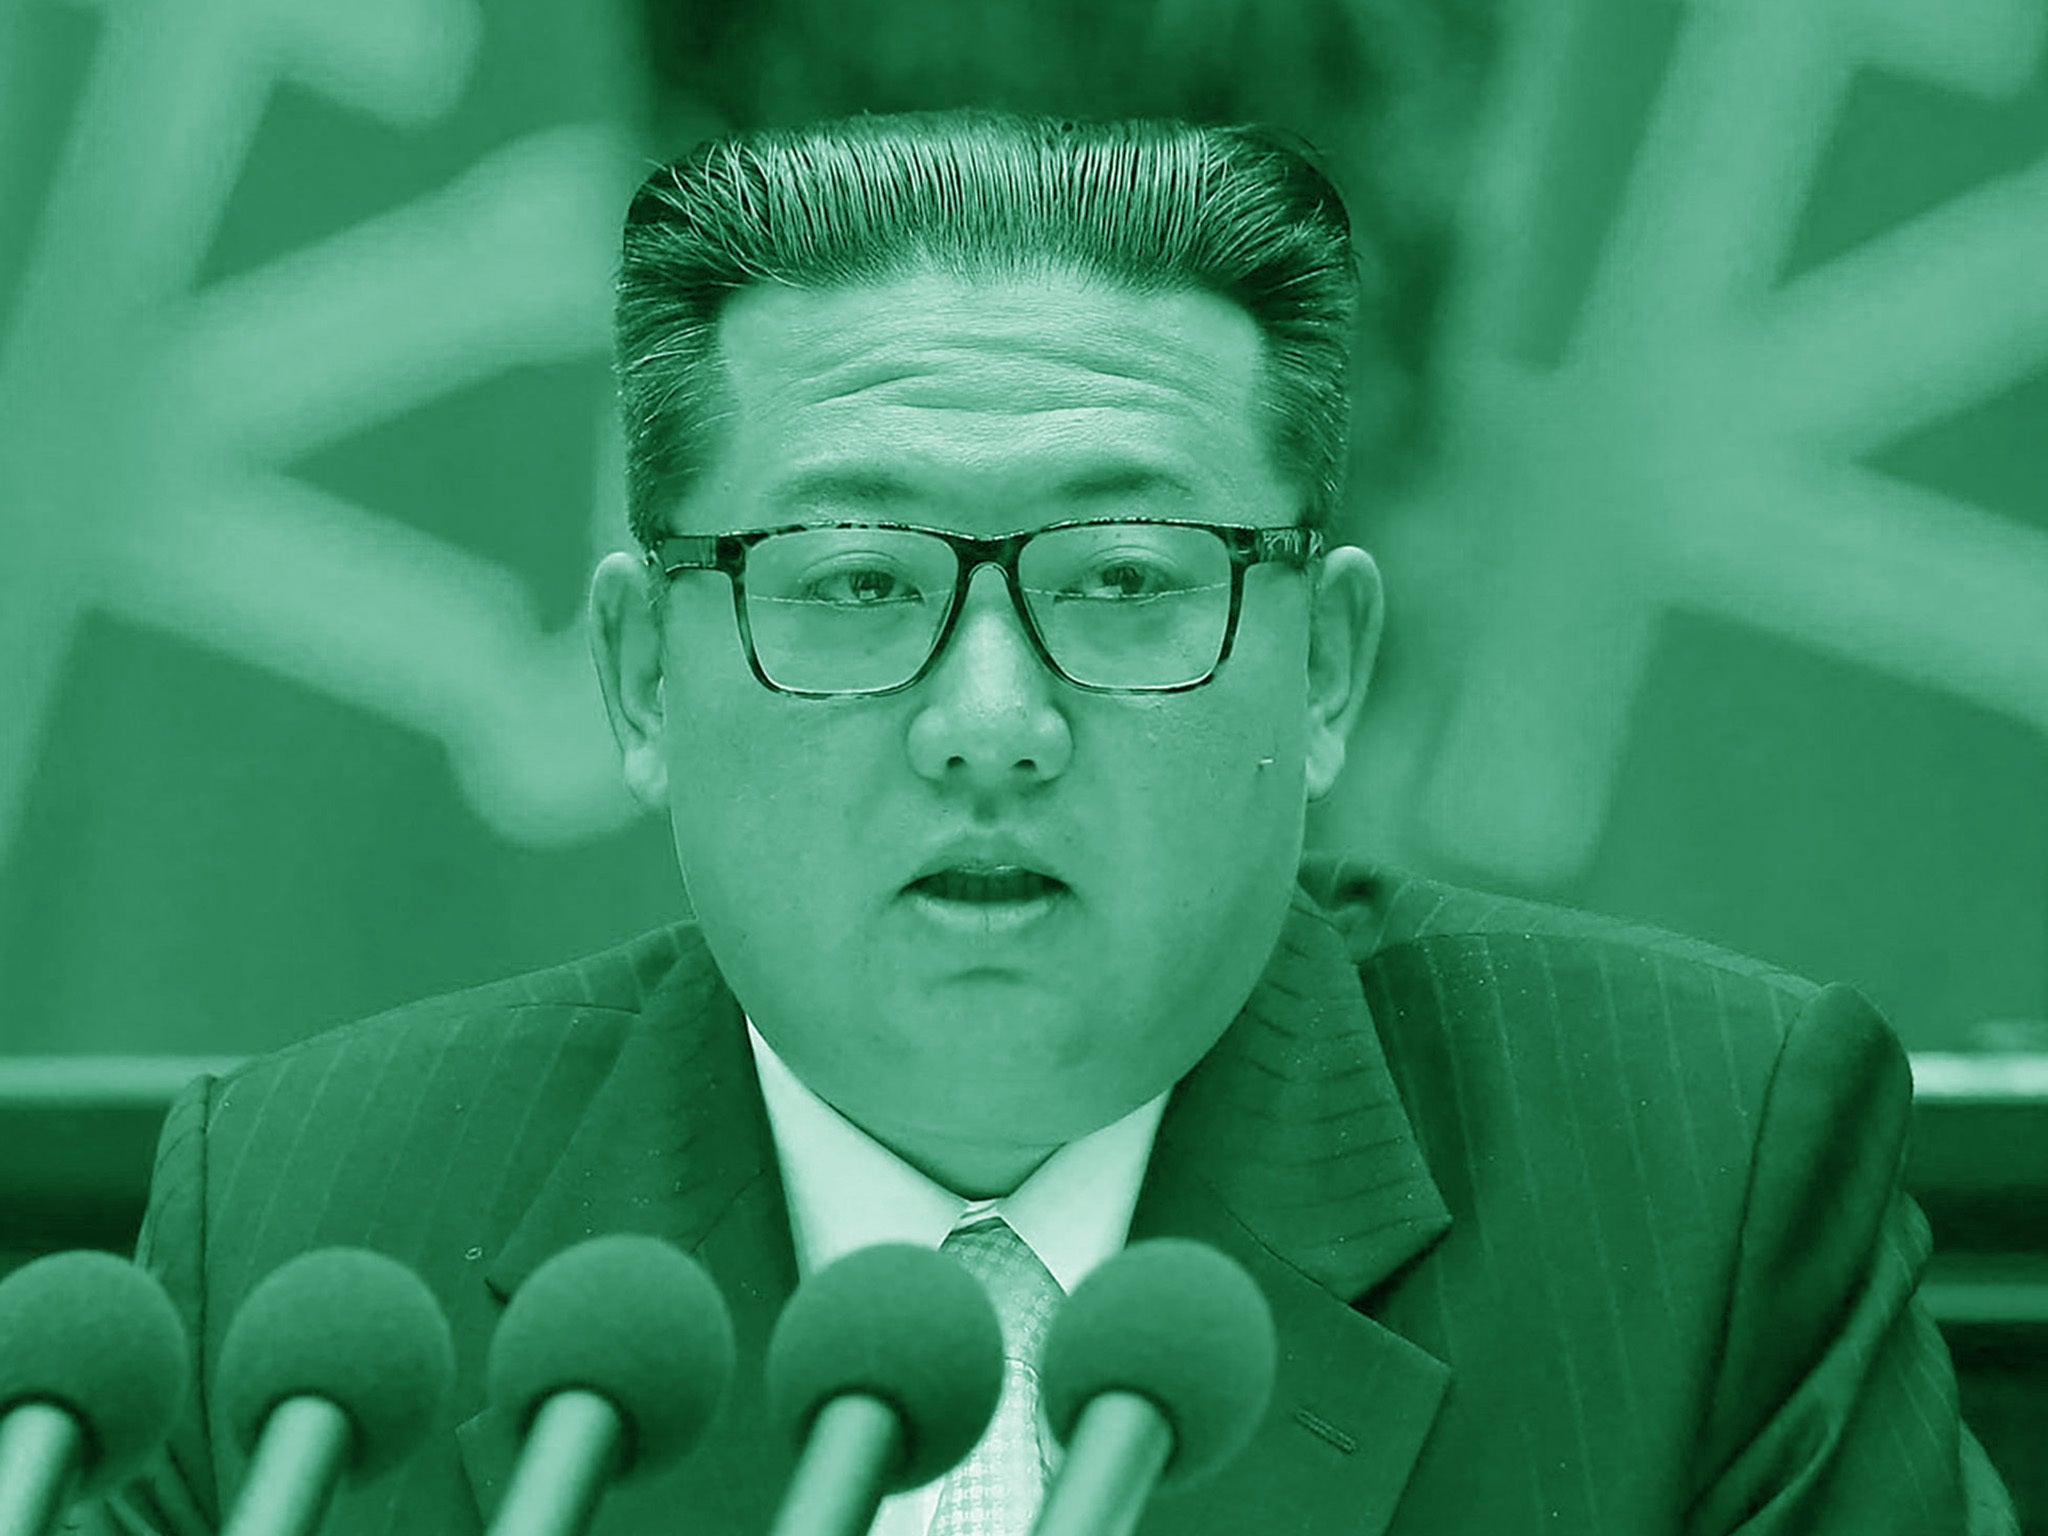 Kim Jong Un says climate change is a global threat